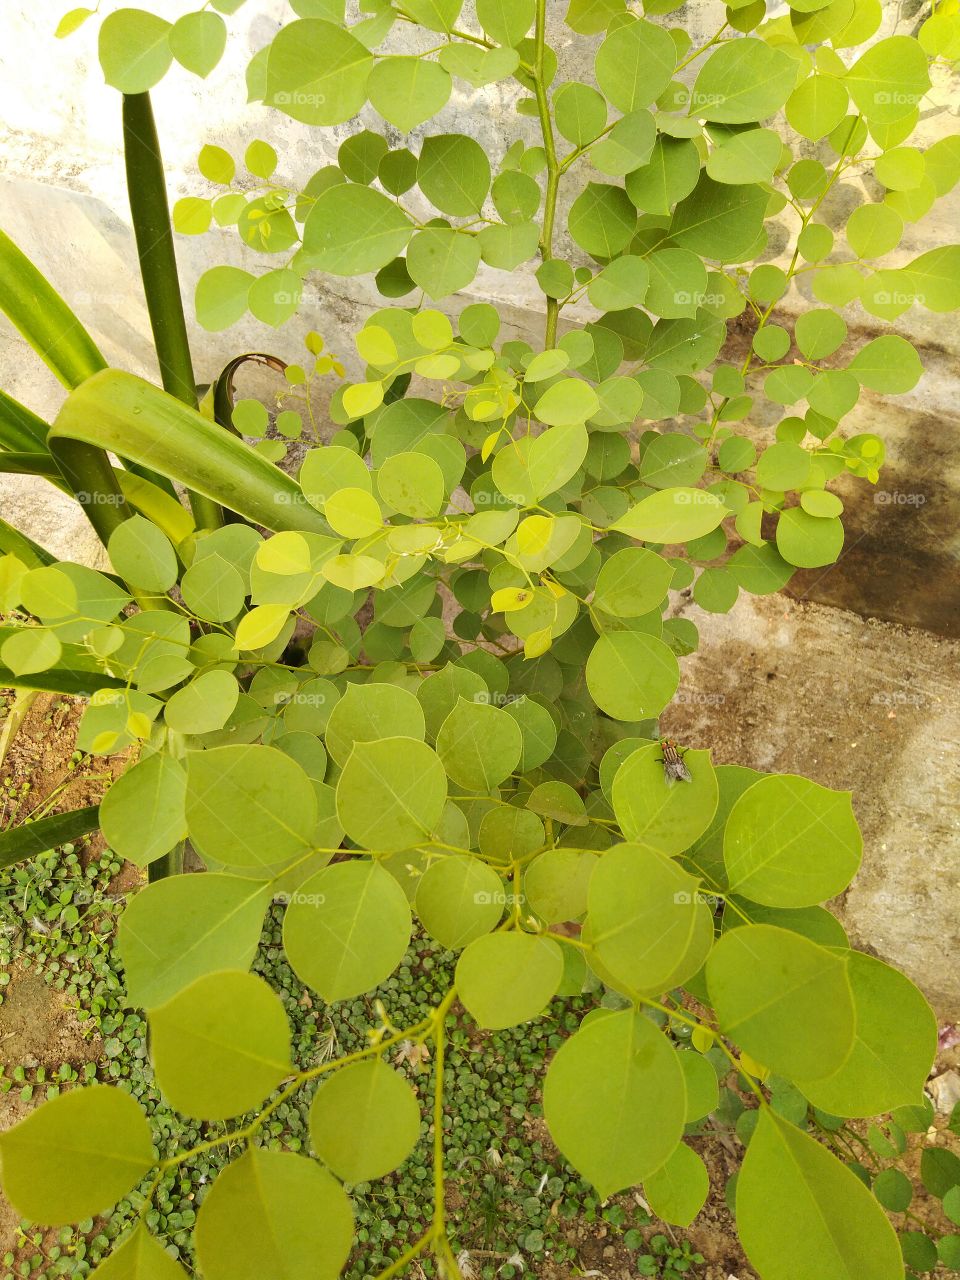 group of leaves